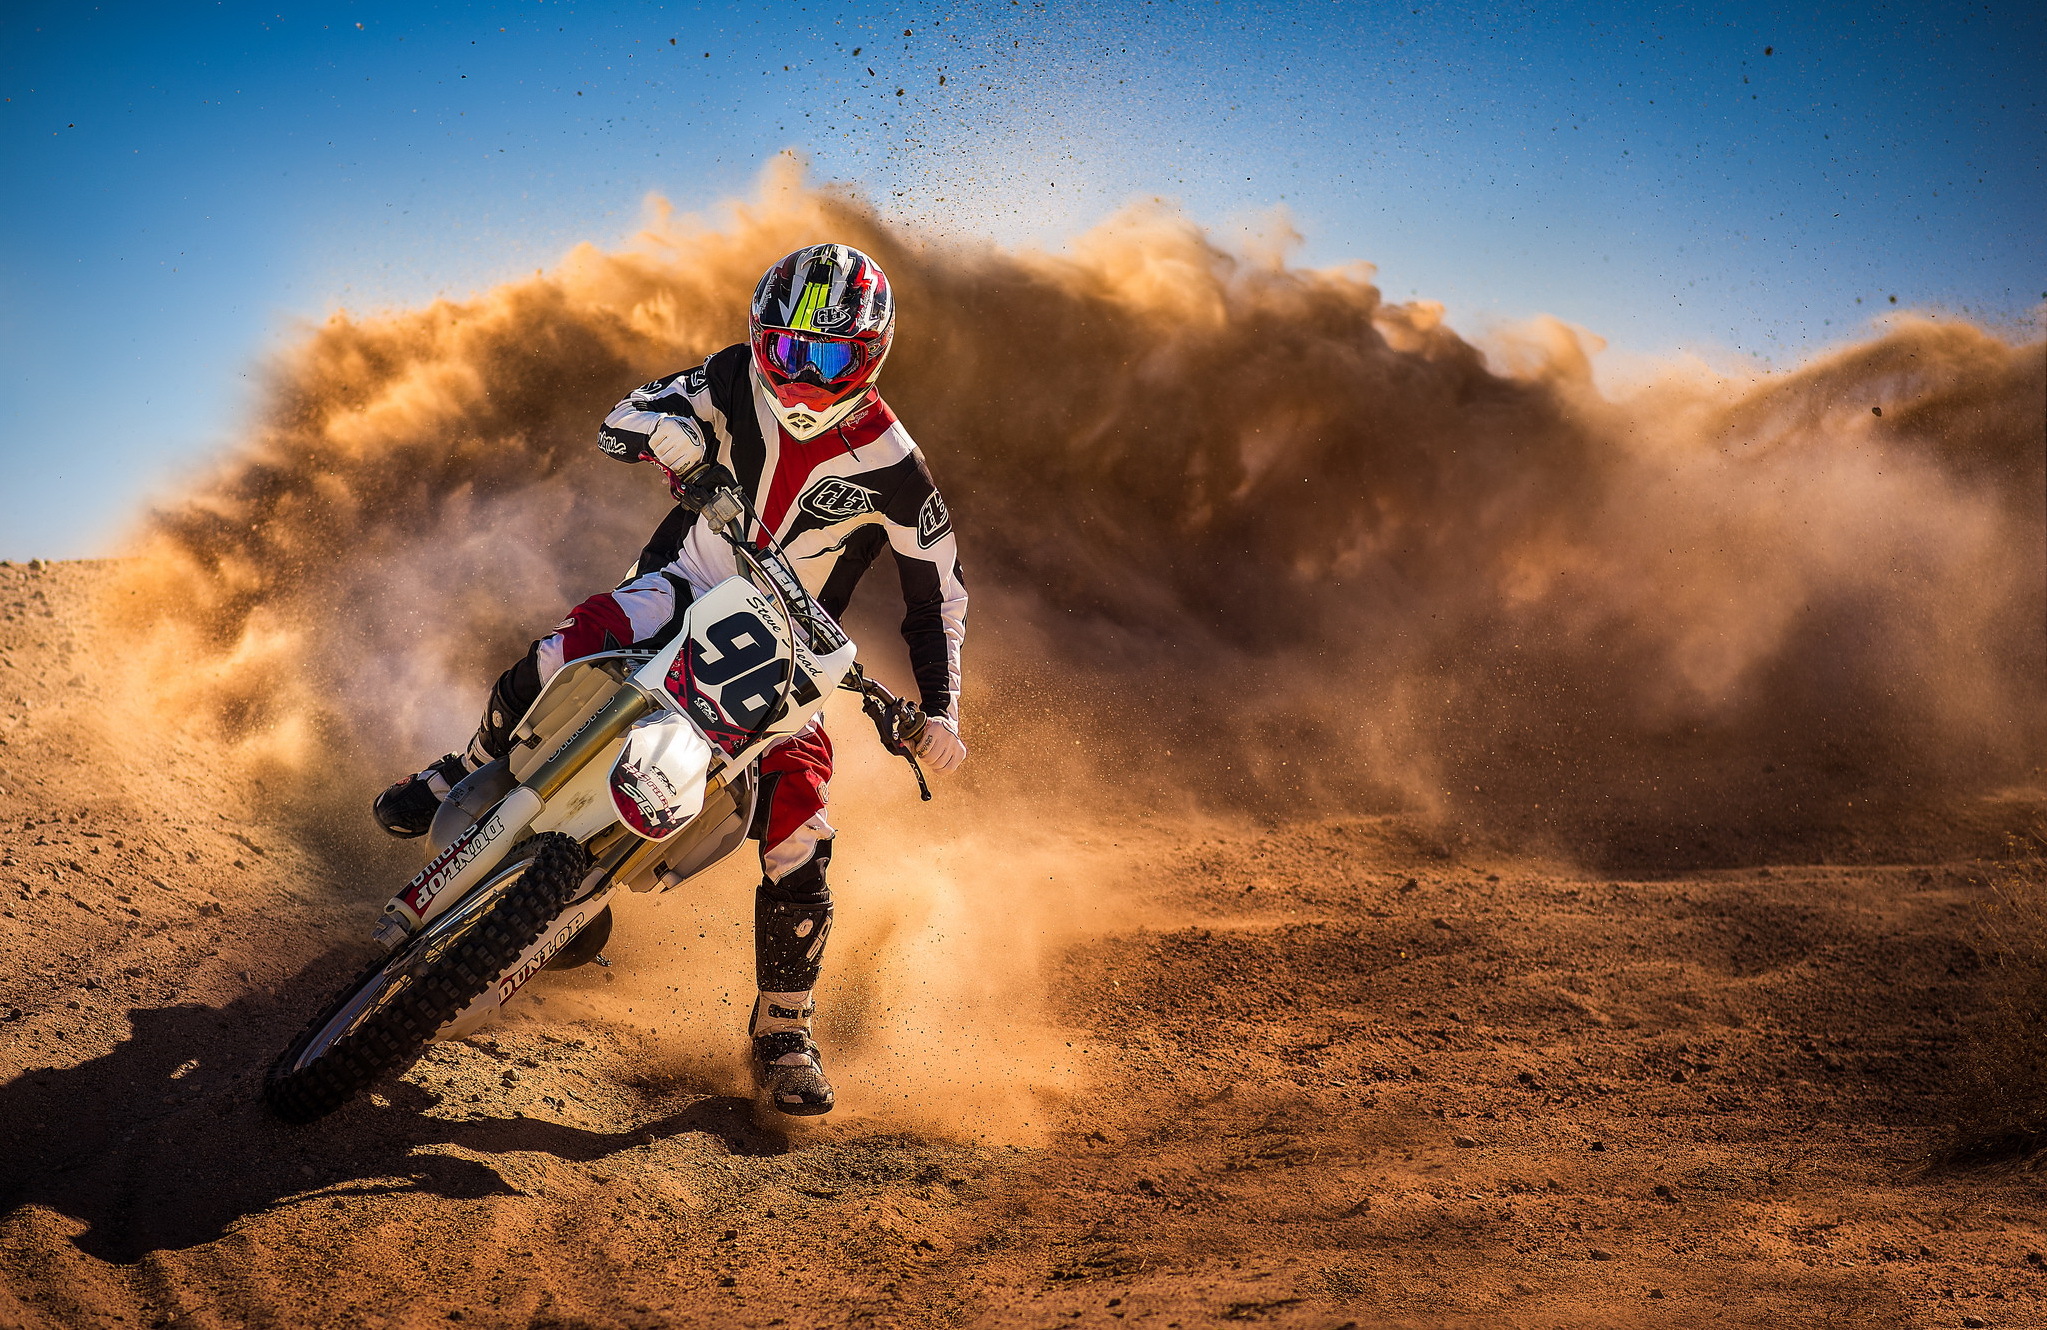 motorcycle, motorcycles, sports, motorcyclist, dust, race